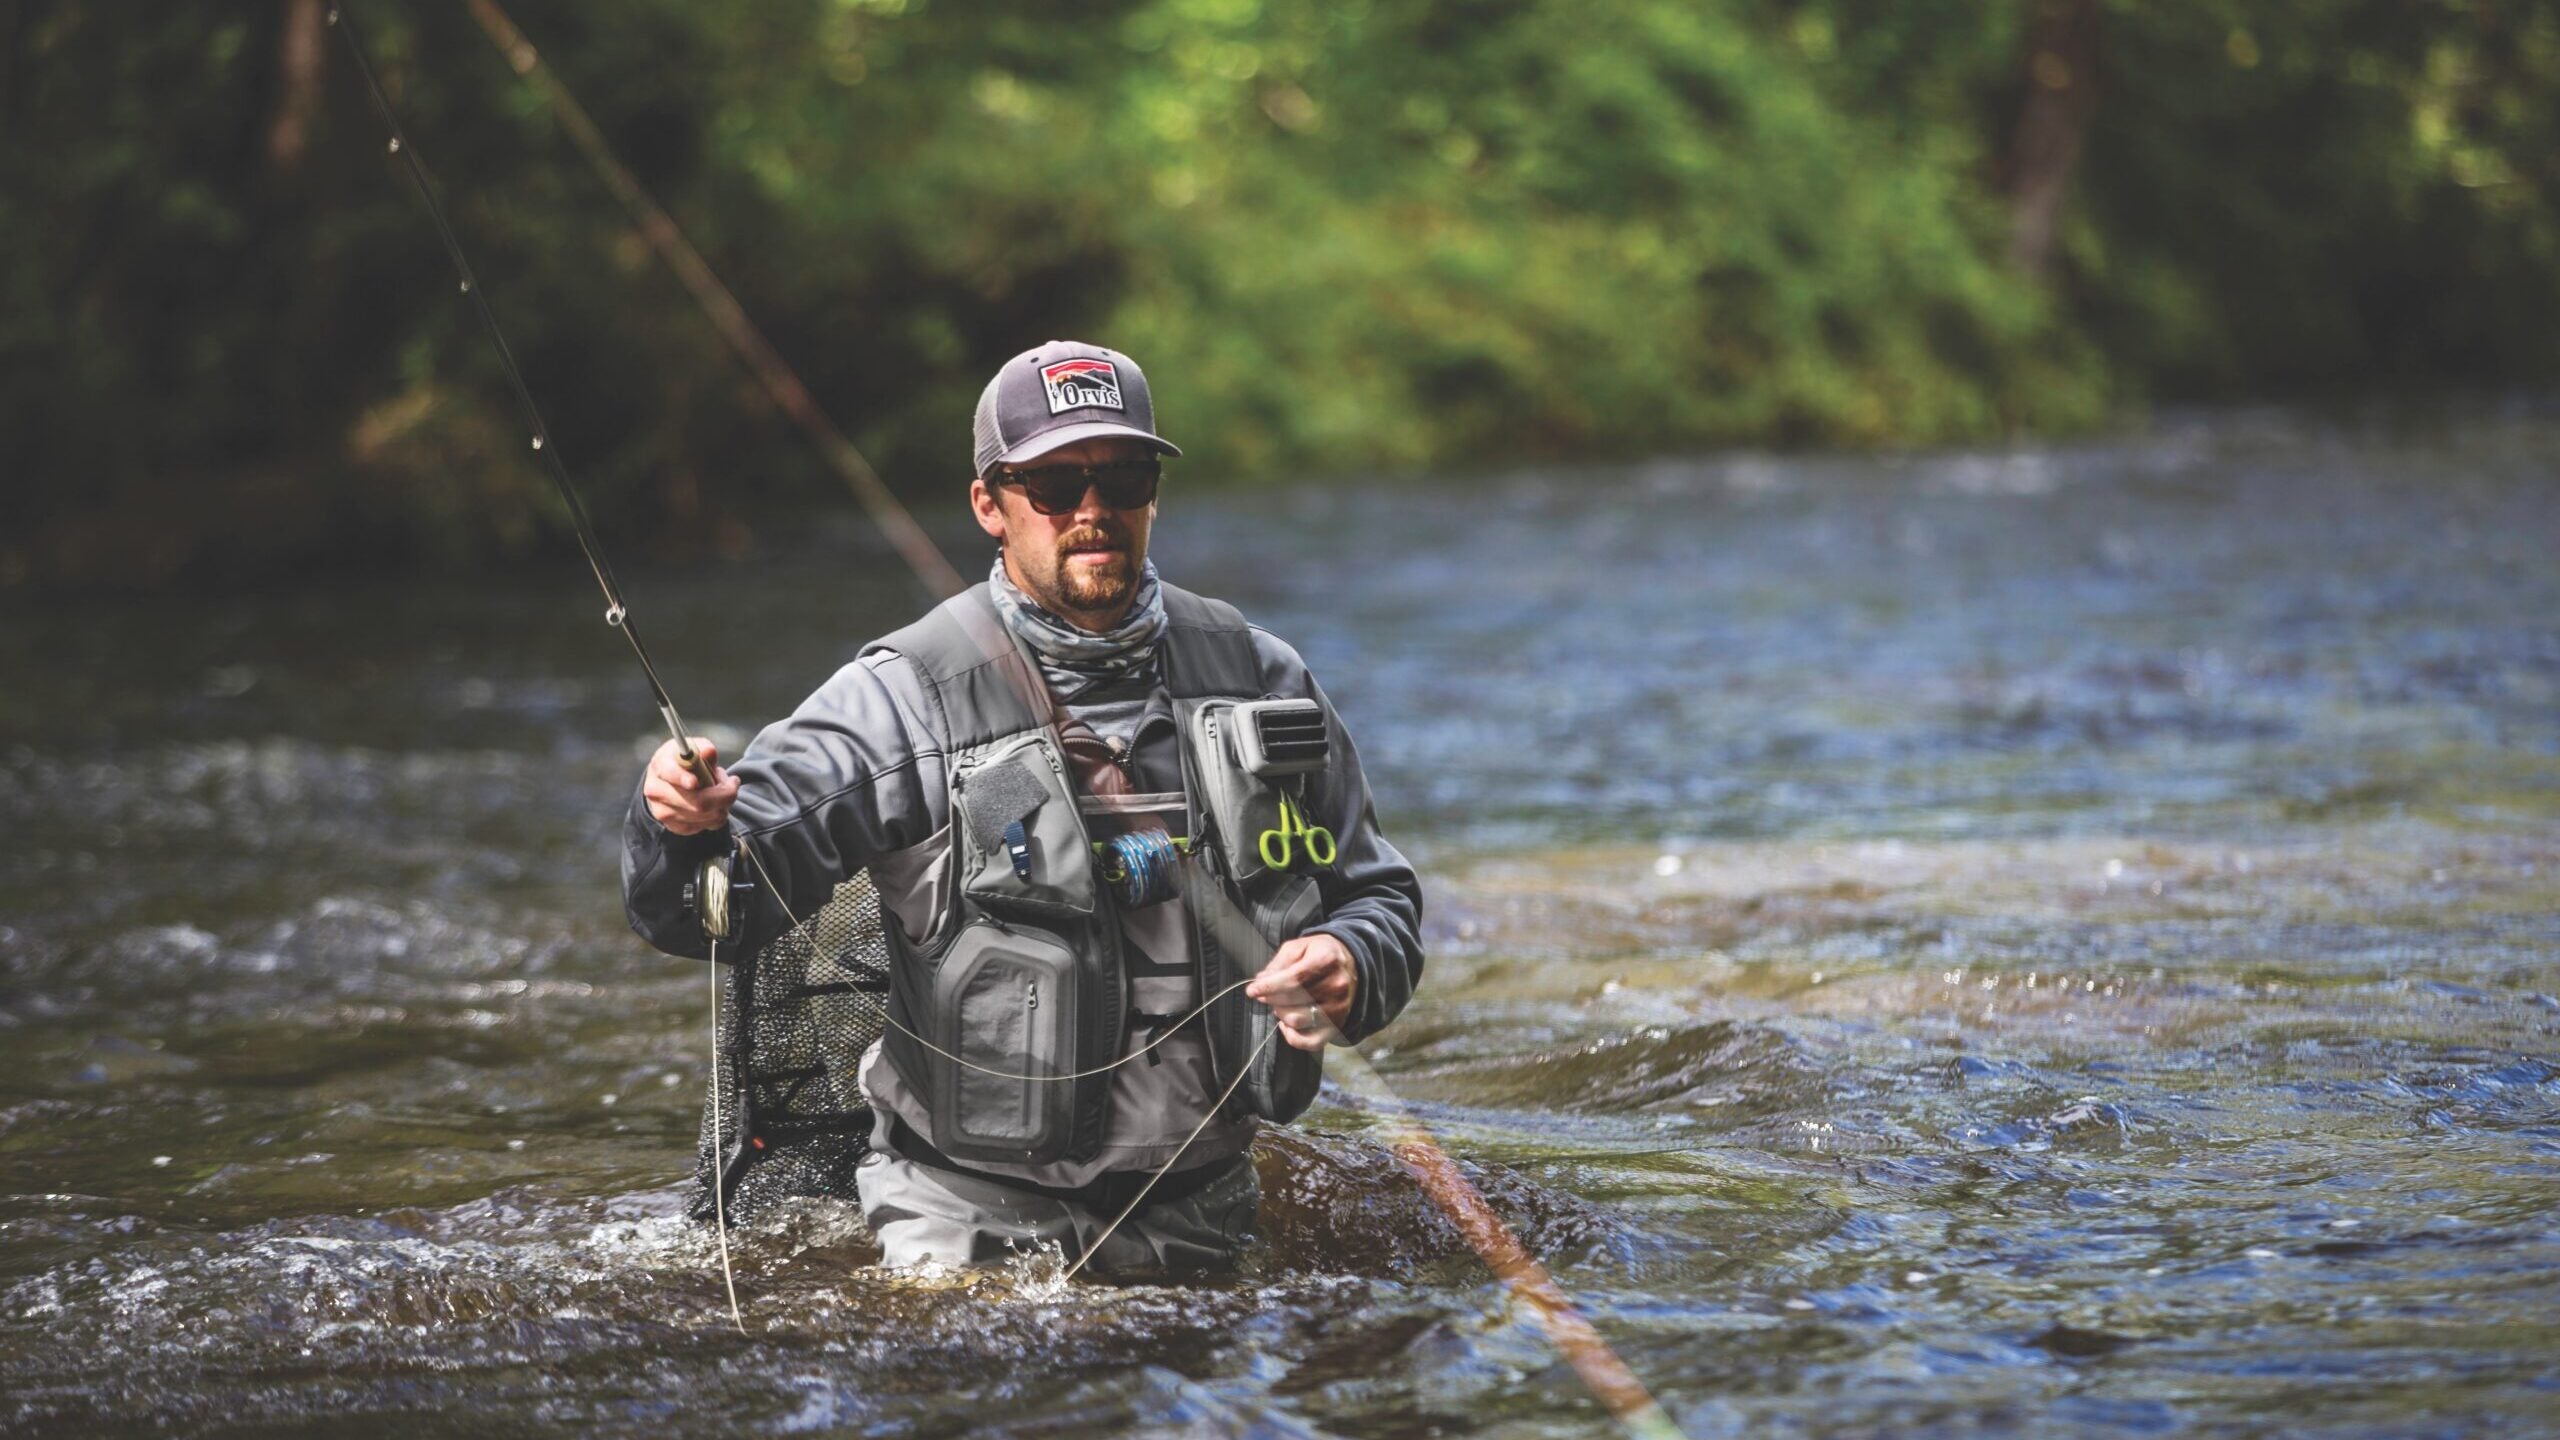 Fly Fishing Gear, Packs, Nets & Fly Storage